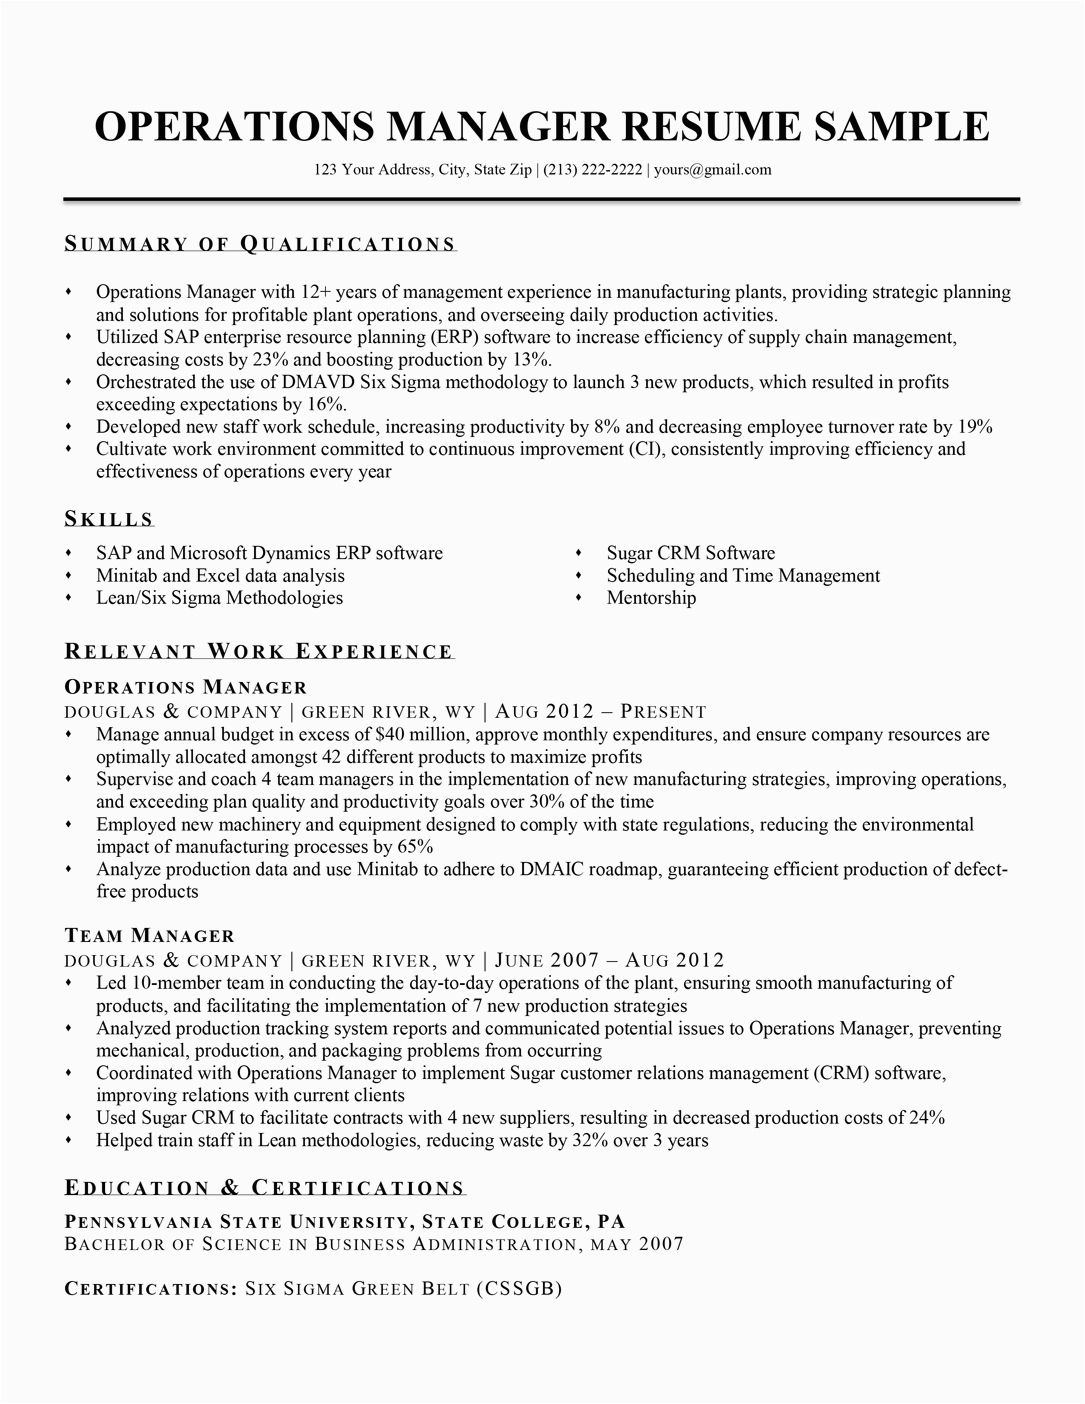 Sample Resume Objective for Operations Manager Operations Manager Resume Sample & Writing Tips